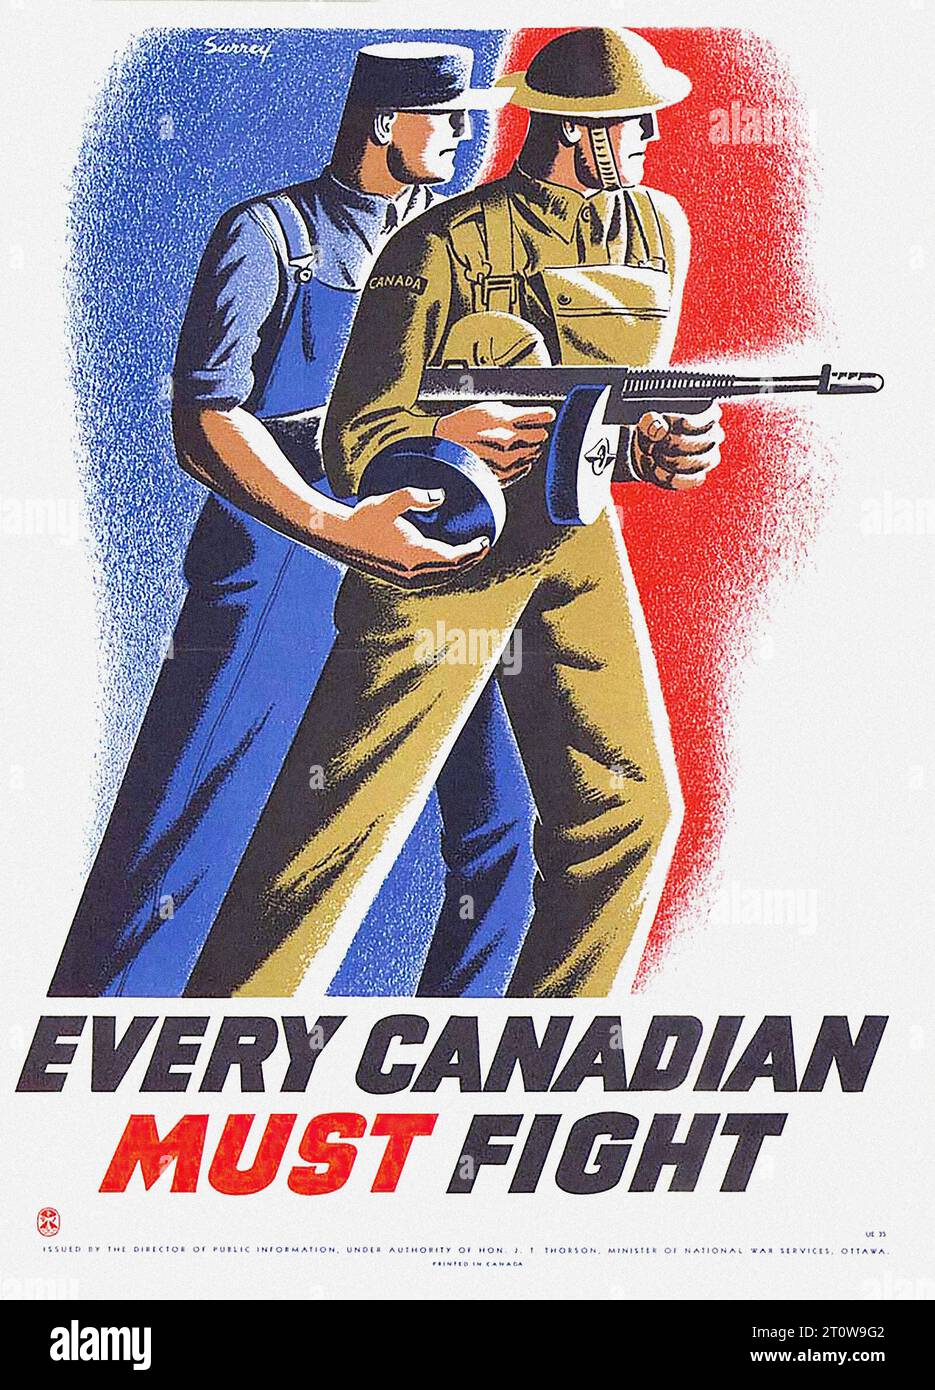 British propaganda , World War II era - “EVERY CANADIAN MUST FIGHT”  This is a British propaganda poster from World War II. The poster features two men, one in a blue uniform and the other in a khaki uniform, both holding weapons. The background is red, white, and blue, and the text “EVERY CANADIAN MUST FIGHT” is written in bold letters at the bottom. The style is graphic and bold, typical of propaganda posters from this era. Stock Photo